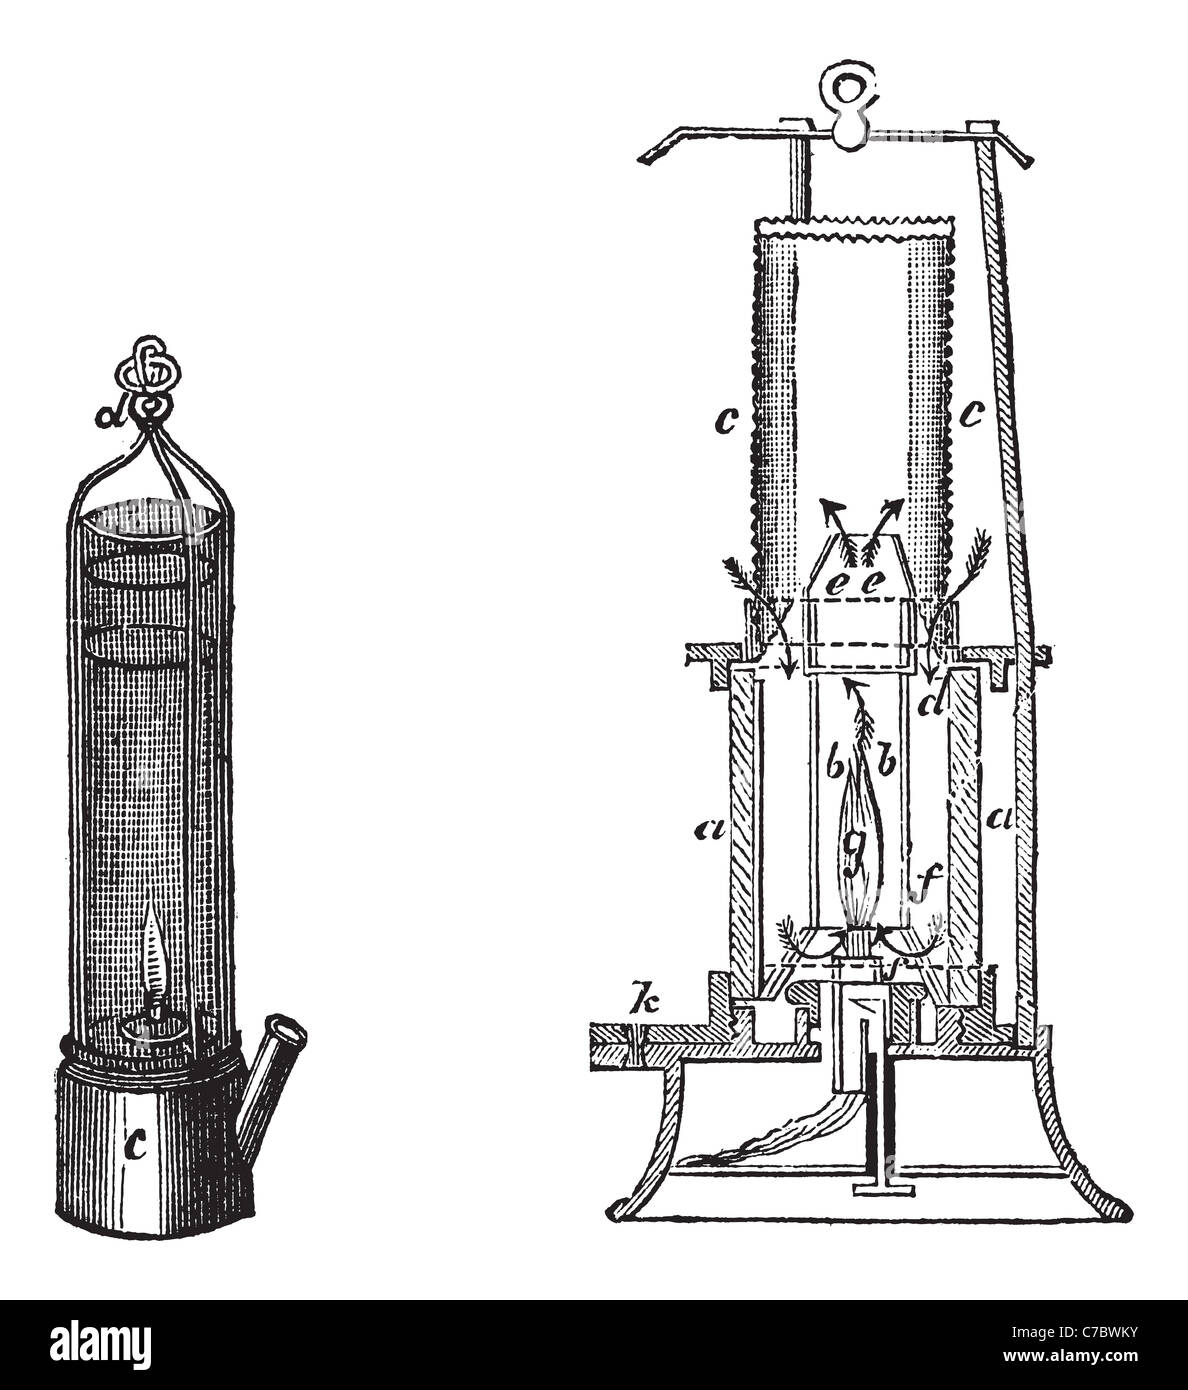 Mackworth vintage engraving. Old engraved illustration of old-fashioned davy safety lamp and mackworth safety lamp, 1890s. Stock Photo